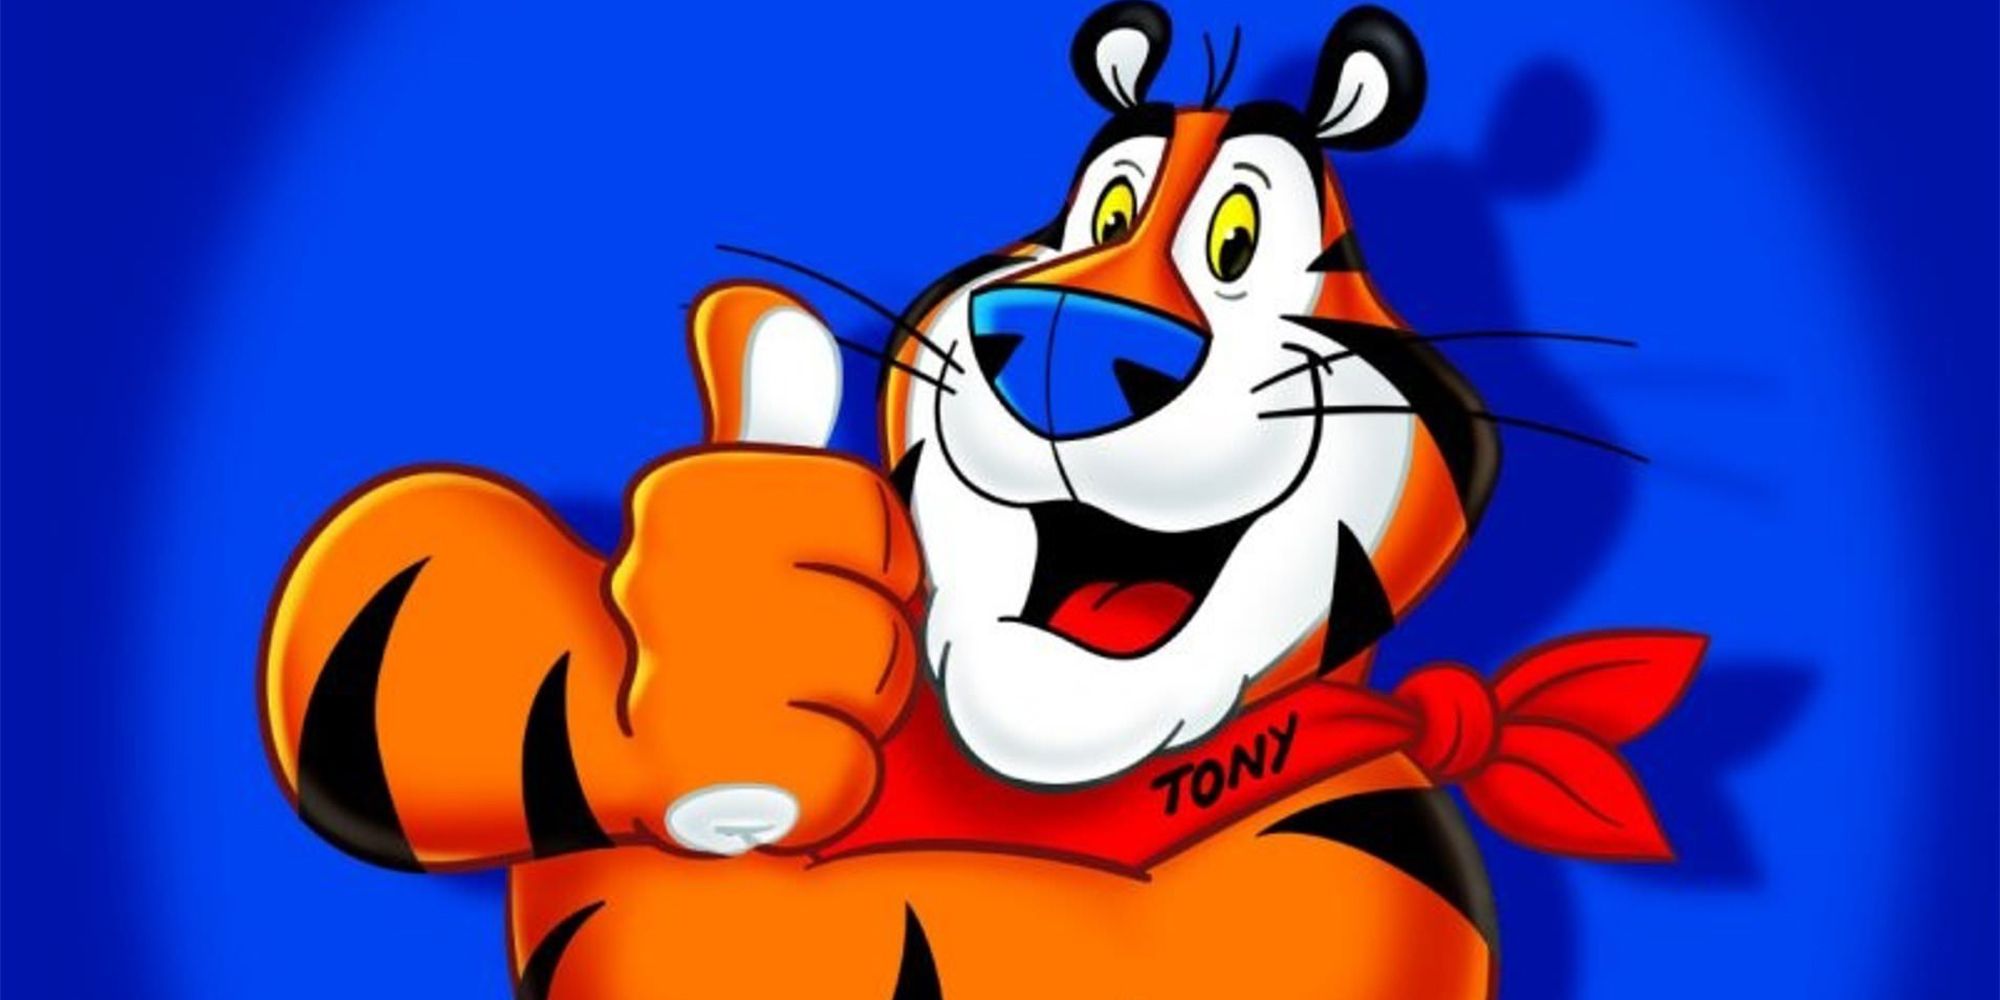 Tony The Tiger gives a thumbs up against a blue background.